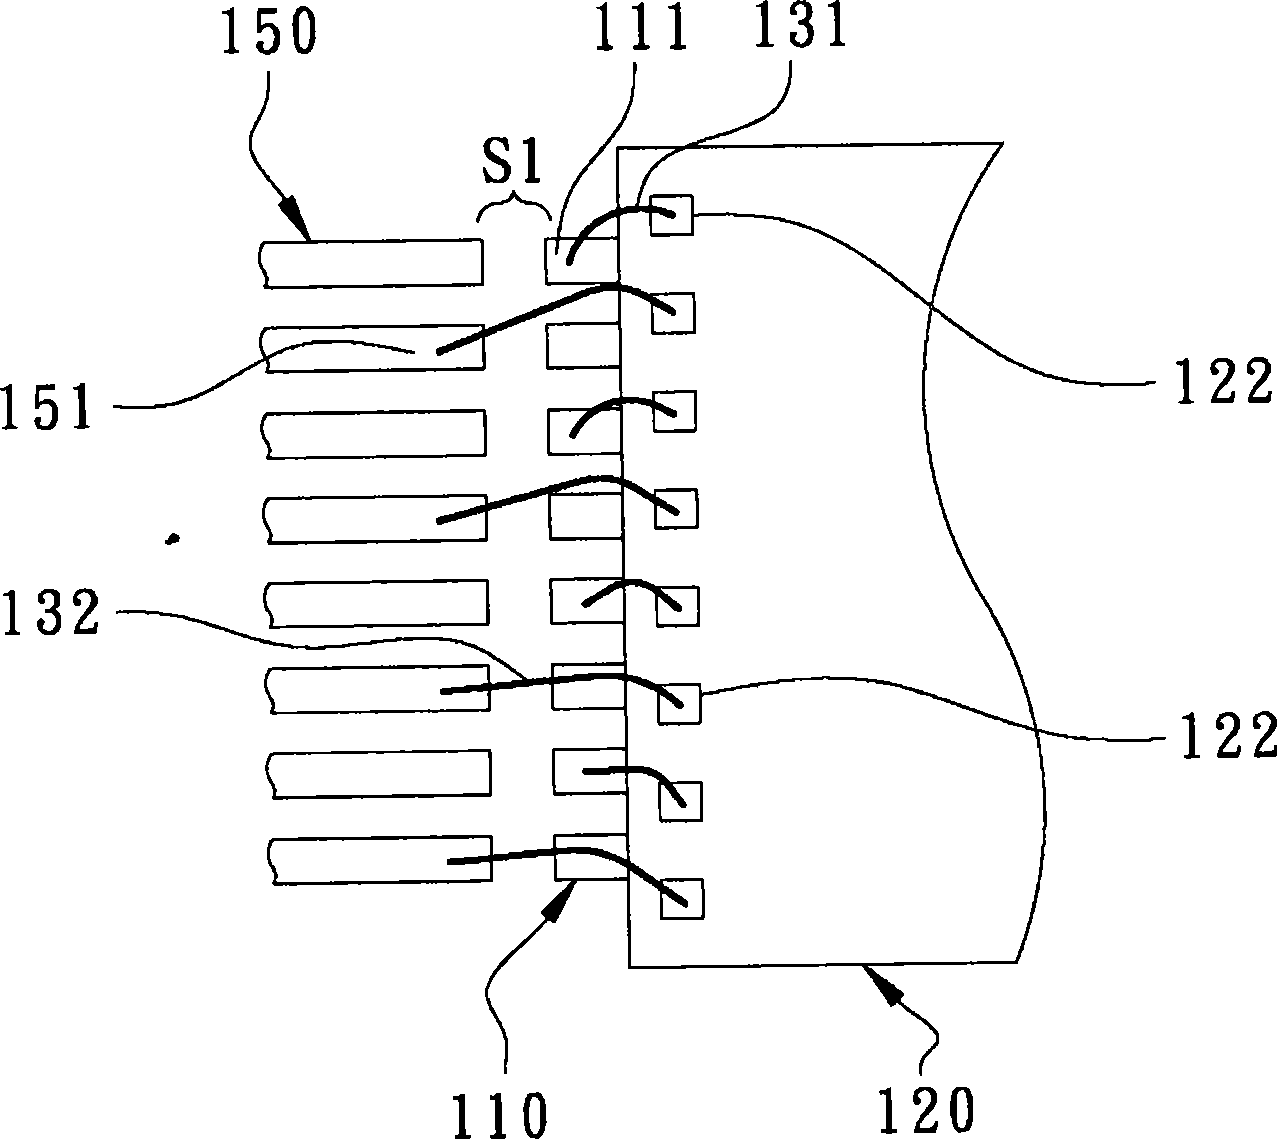 Semiconductor encapsulation conformation throwing in multi-sinuosity connection finger